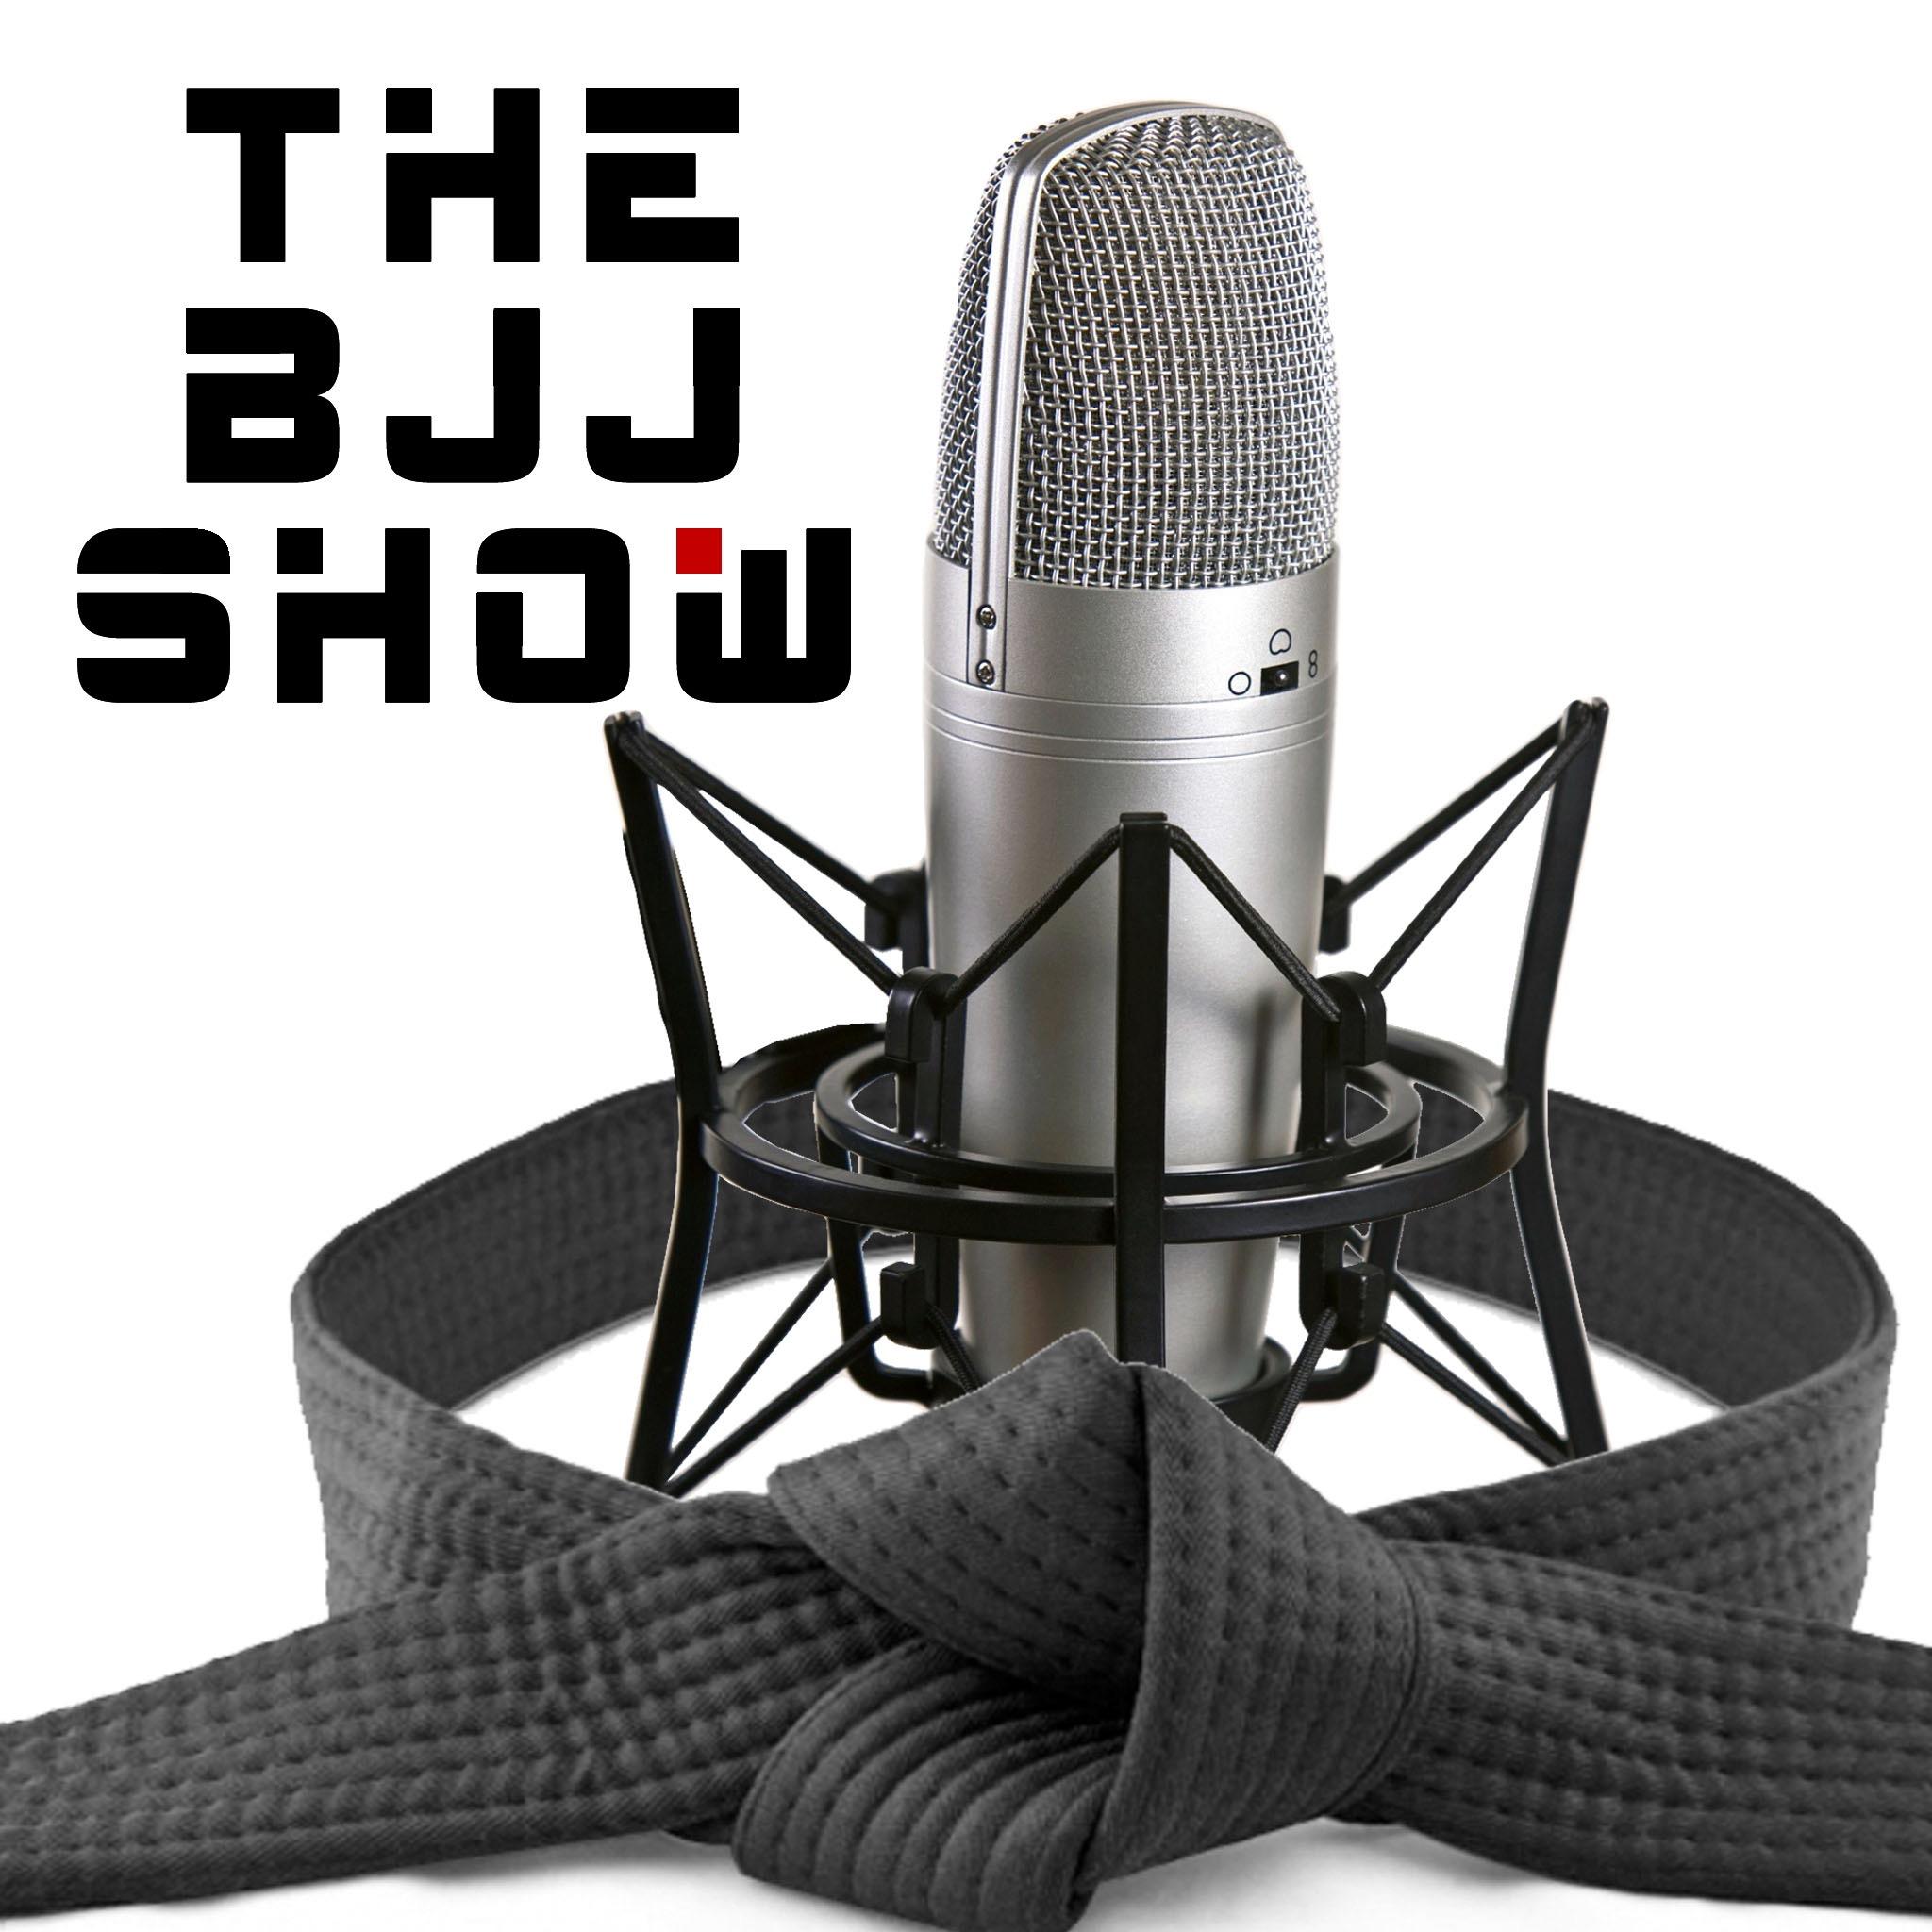 Your Podcast on Brazilian Jiu Jitsu. Listen to our show on our website, or your favorite Podcast App!